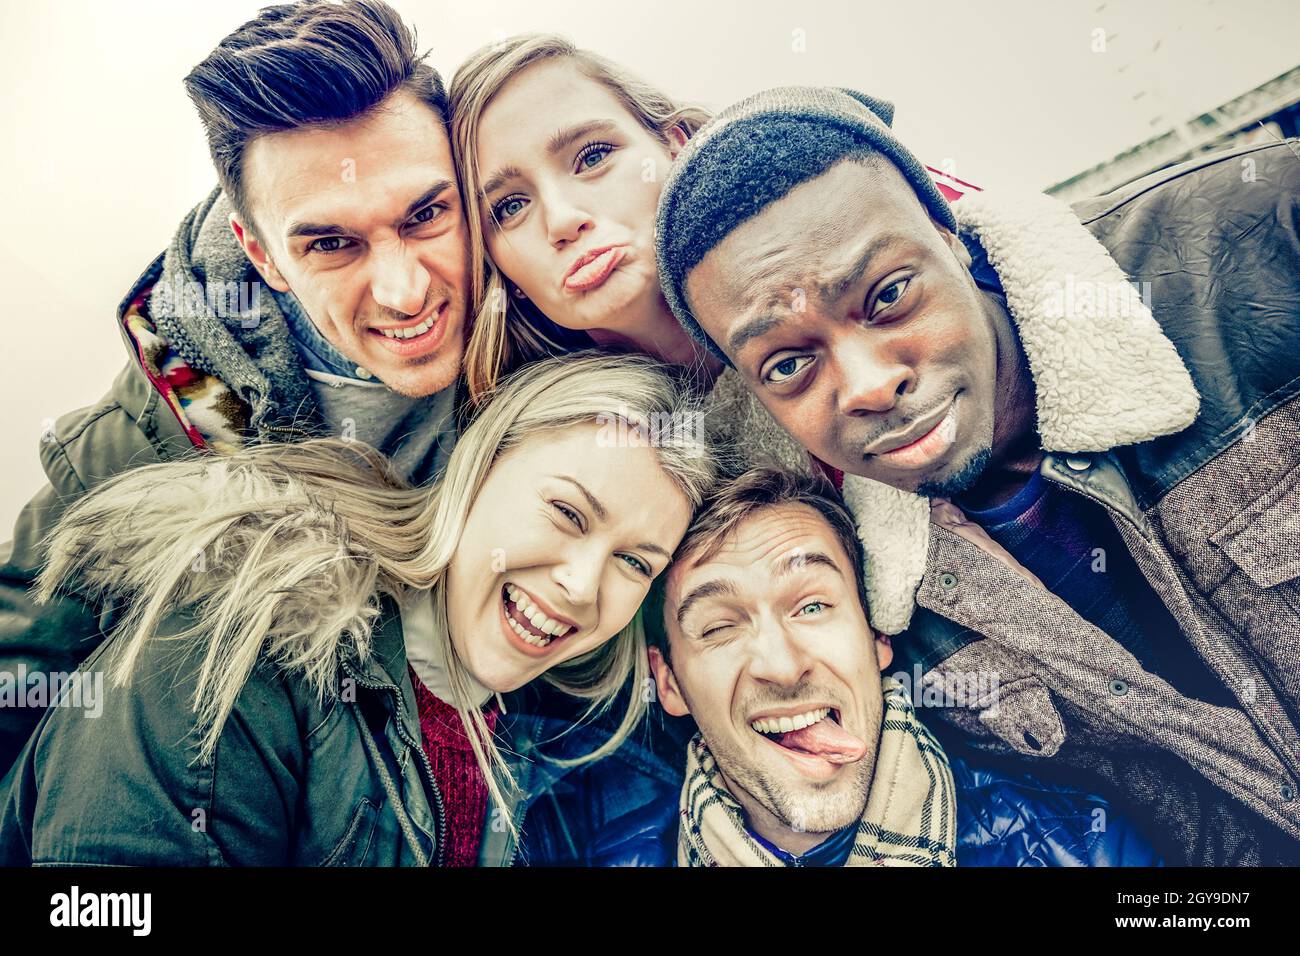 Best friends taking selfie outdoor on autumn winter clothes - Happy youth concept with multiracial people having fun together Stock Photo